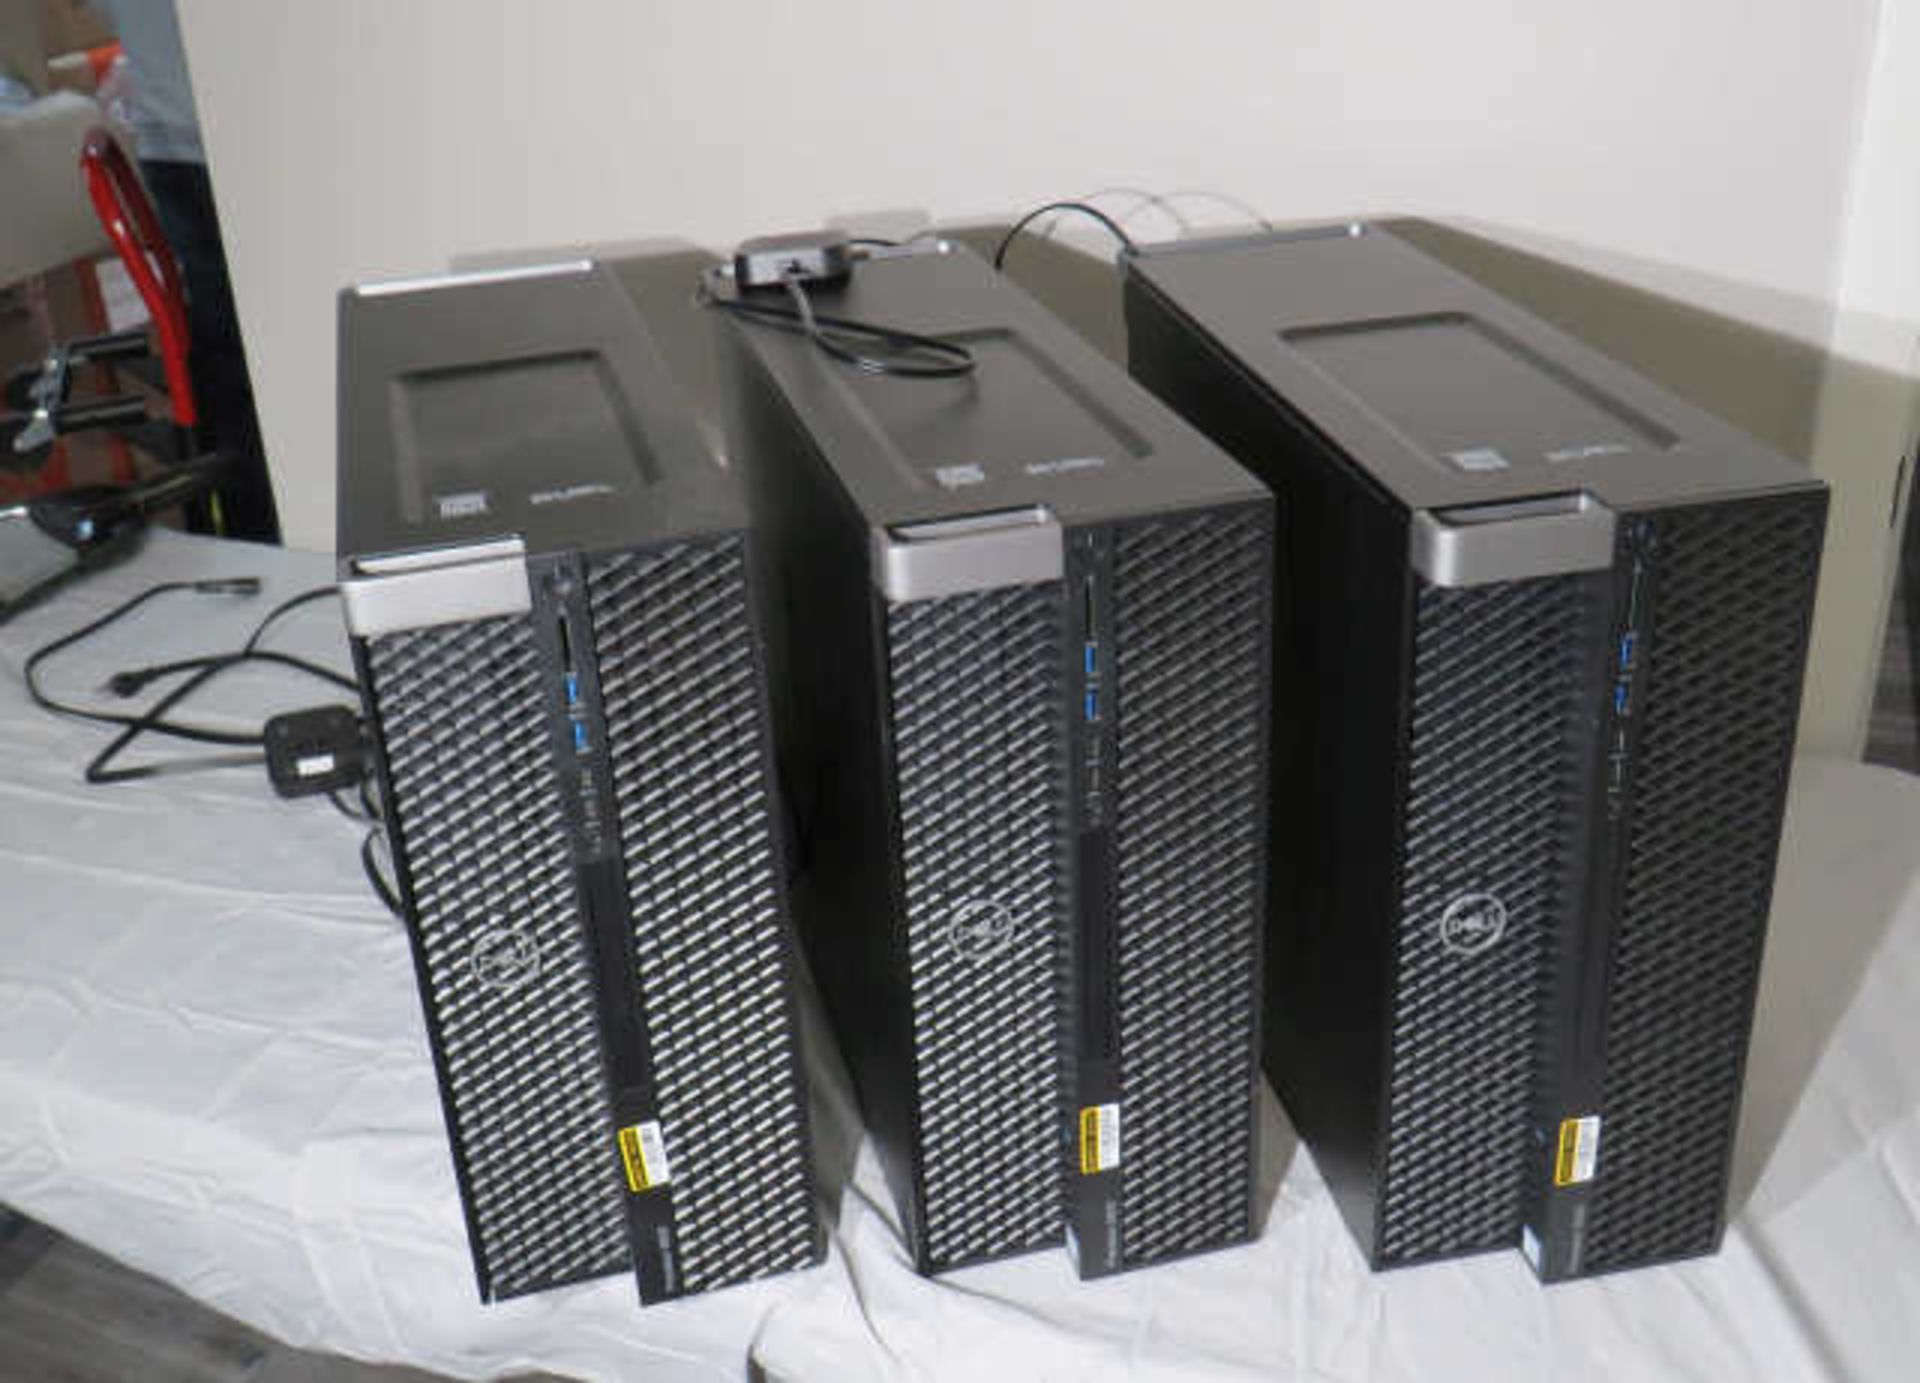 Dell 5820 computer with dual AMD Radeon Pro W5700 8GB graphics cards